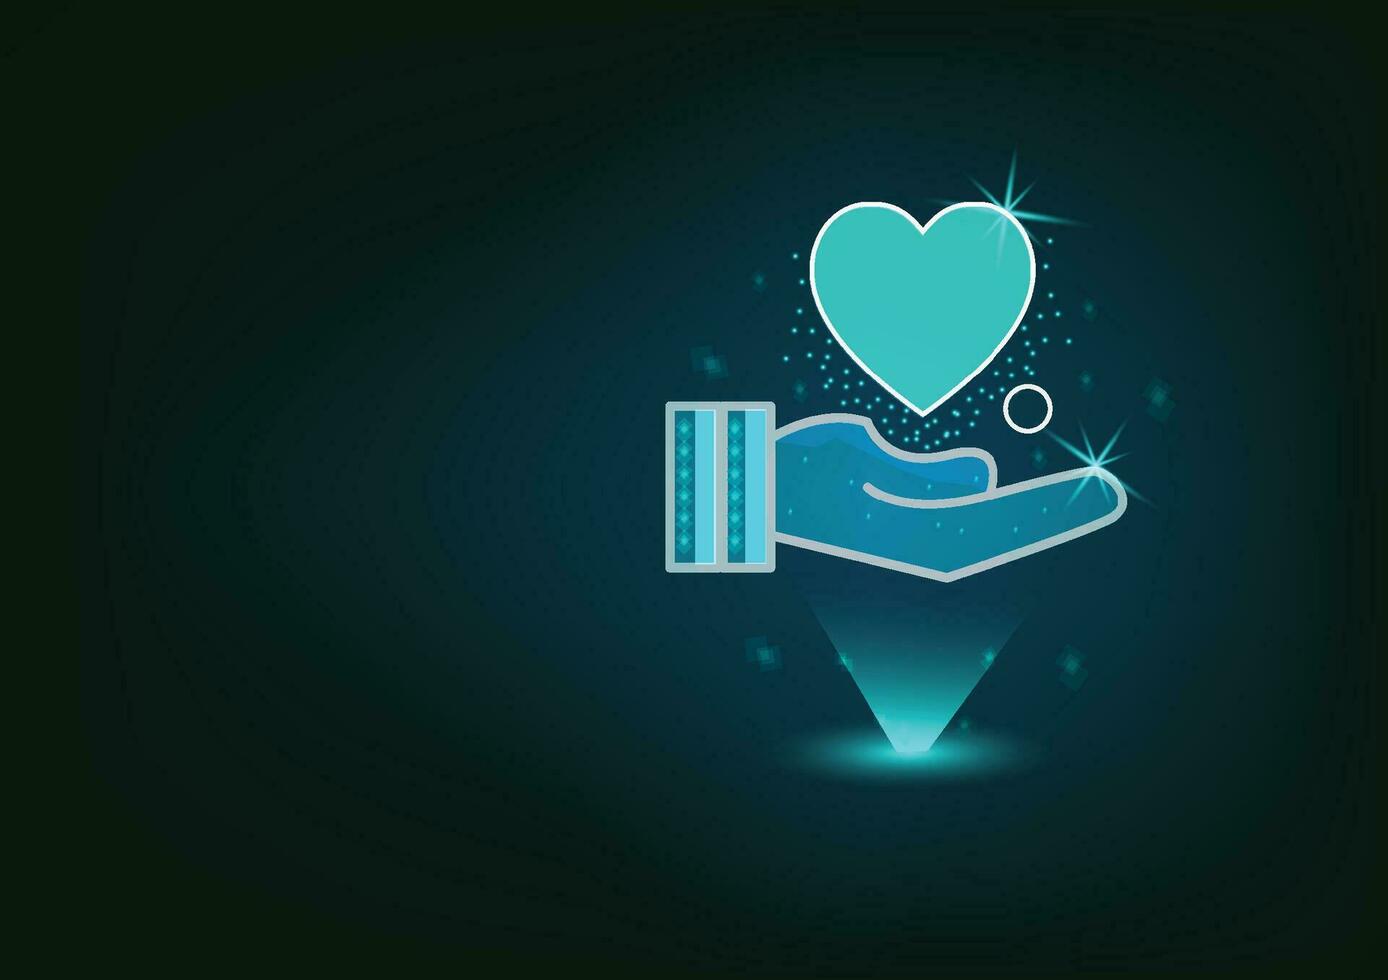 A hand holding heart on Dark background.heart health,happy volunteer charity,Sharing love. Valentine's day,hand holding heart sign,vector graphics,Vecter shows the principle of caring and good health. vector